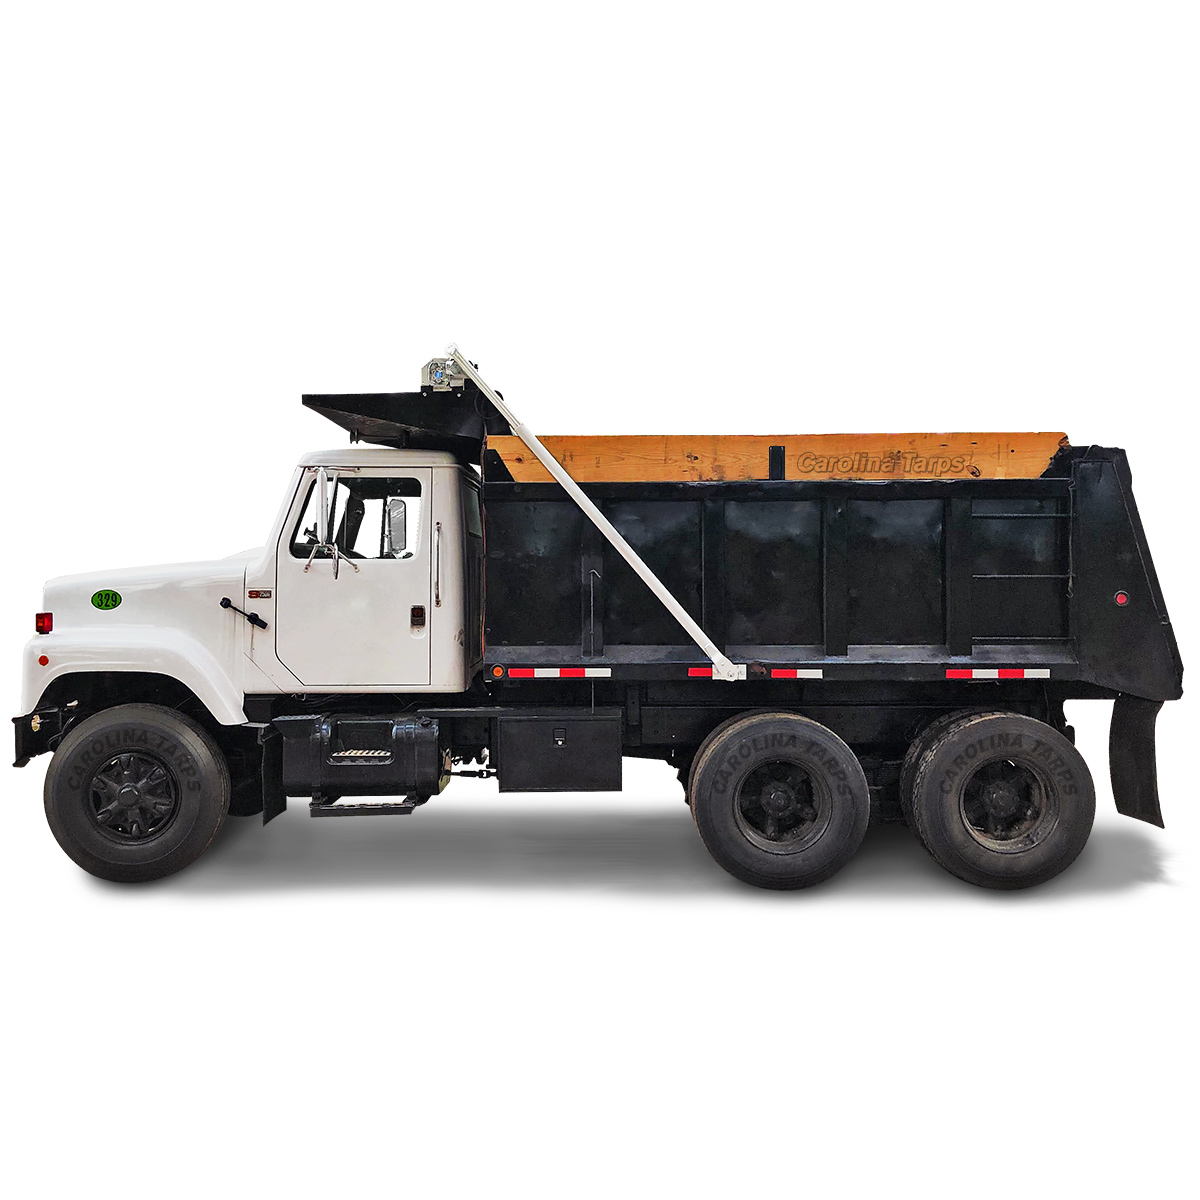 Electric Dump Truck Tarp System - ALUMINUM 4 Spring Tarp Kit for Dump Beds Up to 24 Long and OVER 95" Wide